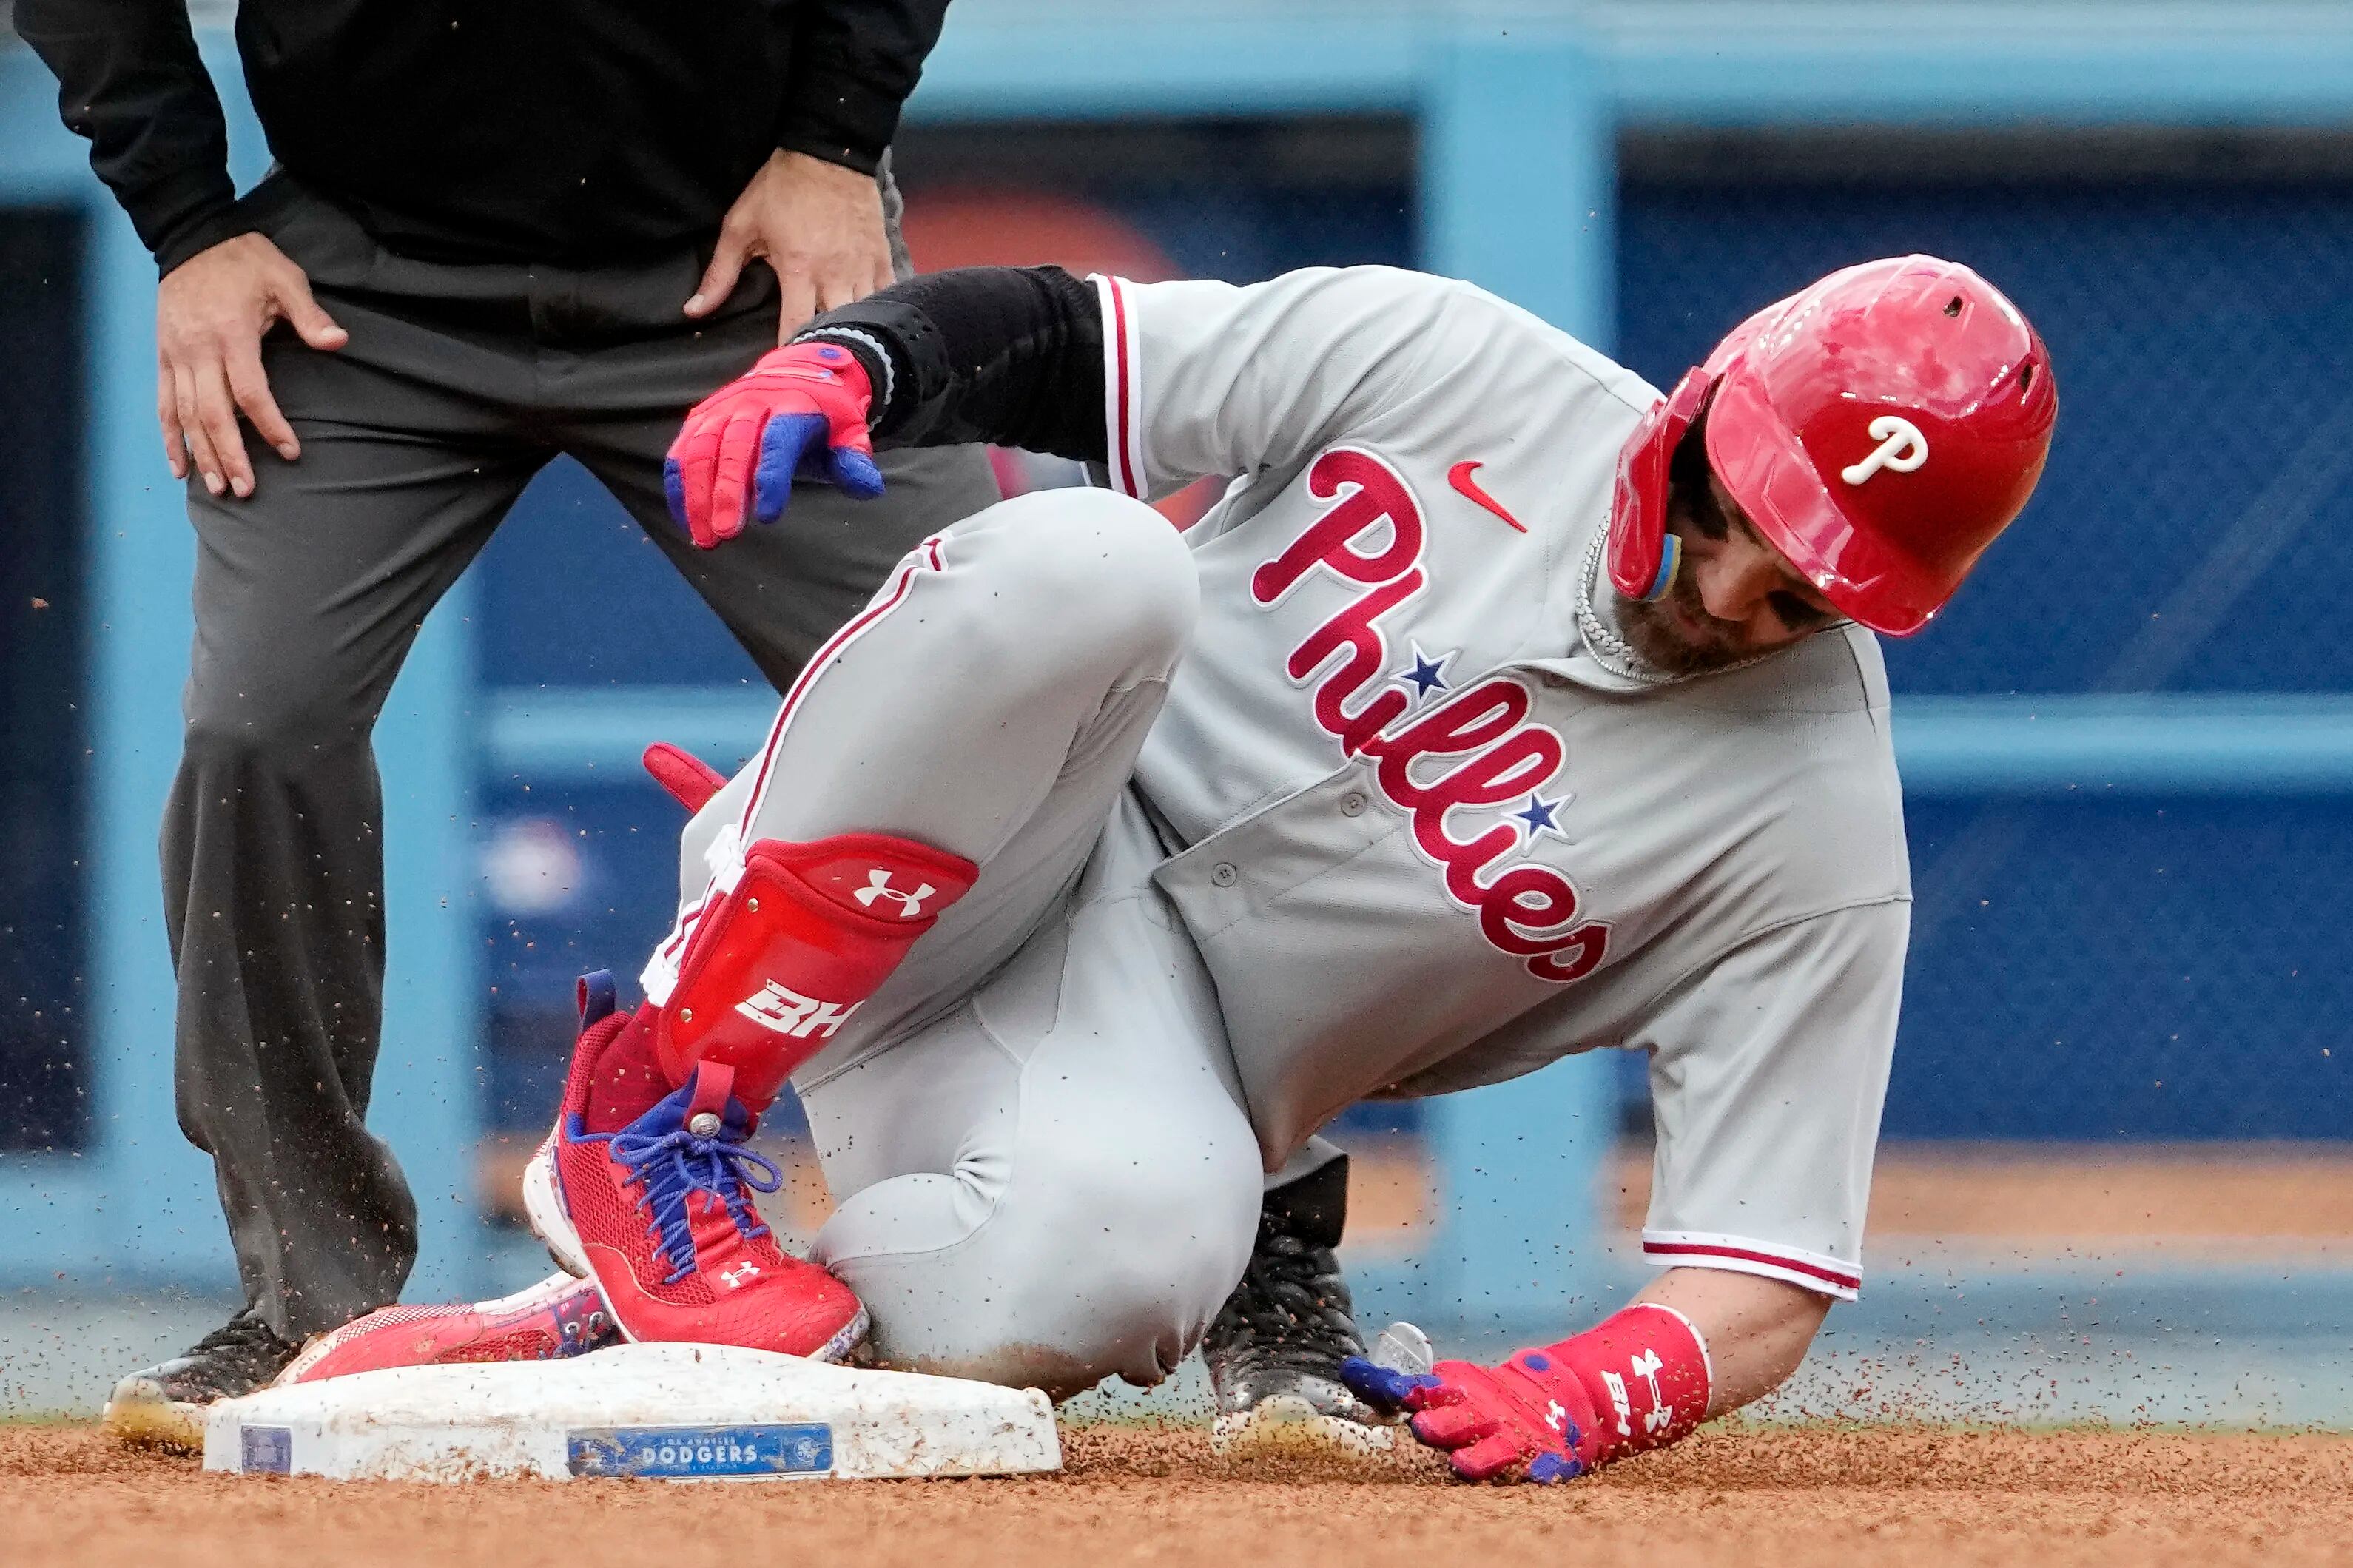 Spring training: Observations from the Philadelphia Phillies' win